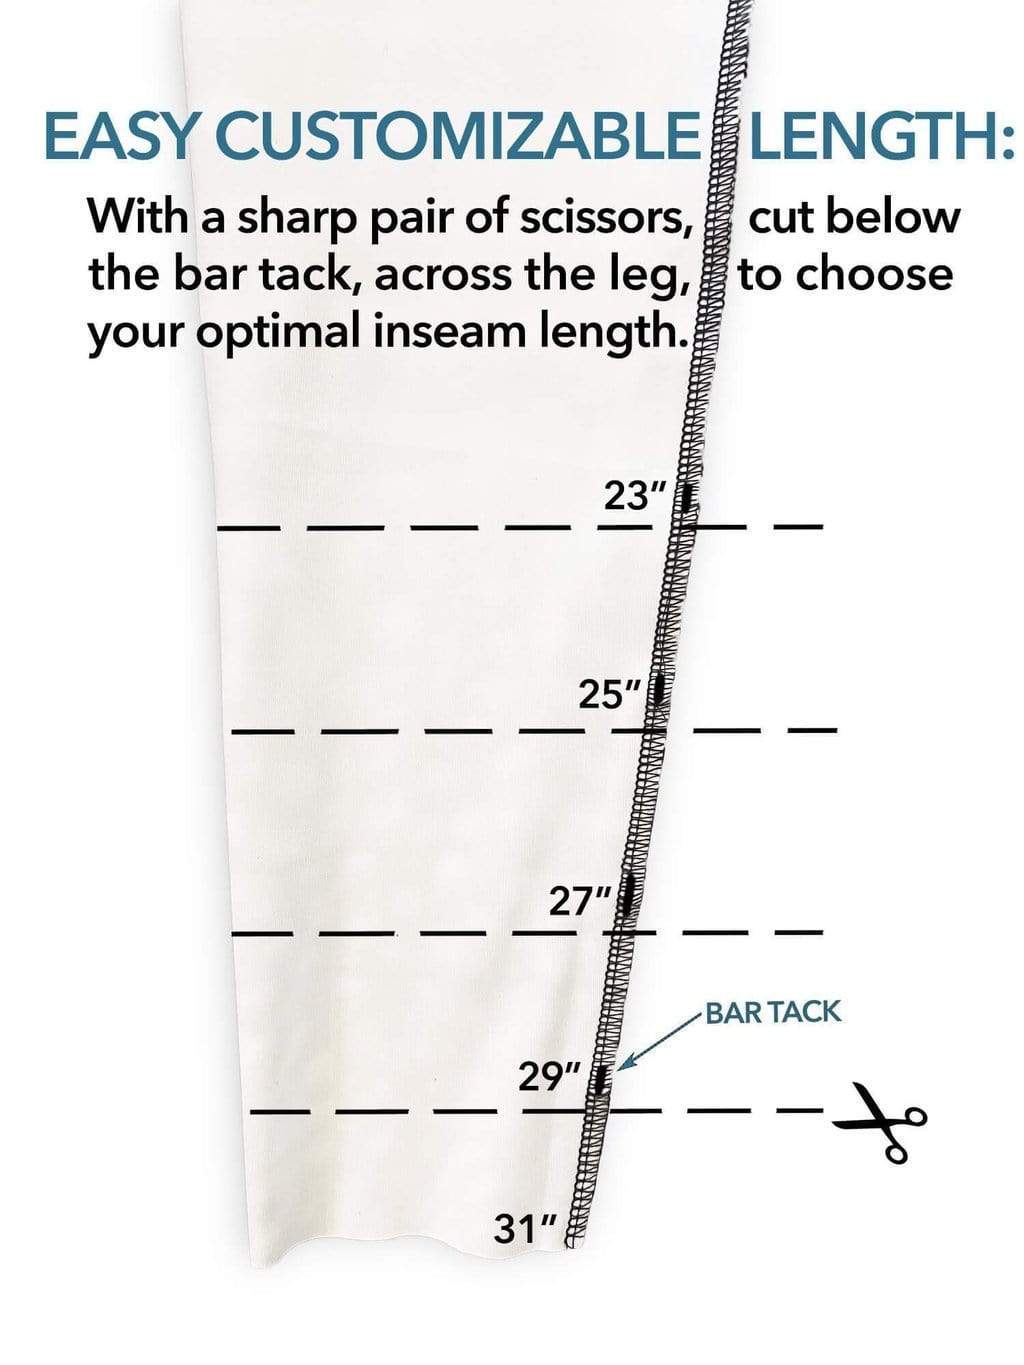 Waterlust Mermaid Camo Leggings instructions for customizing inseam length by cropping